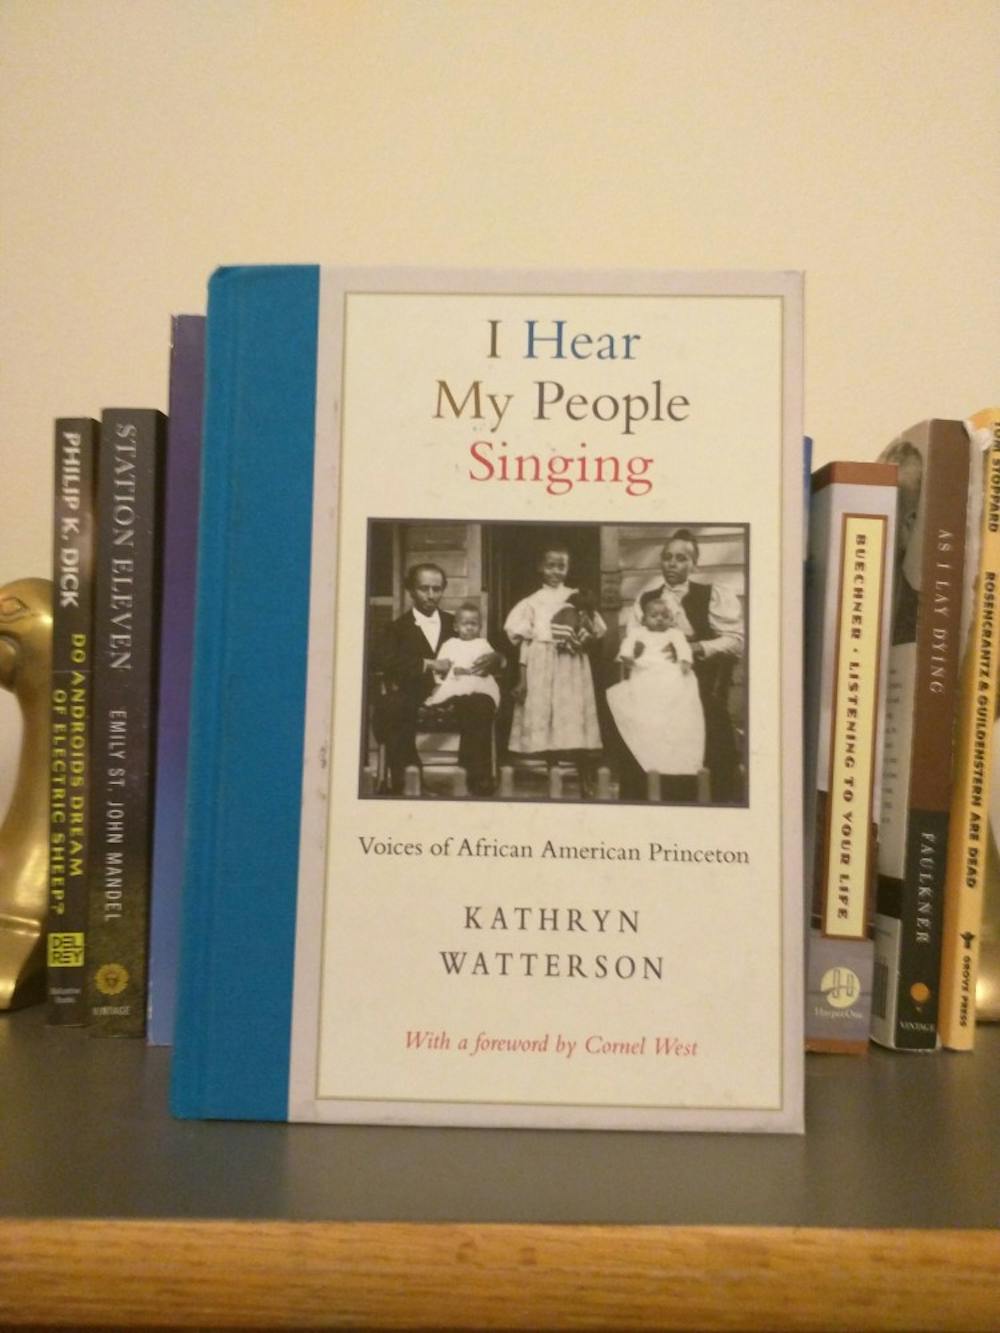 I Hear My People Singing book